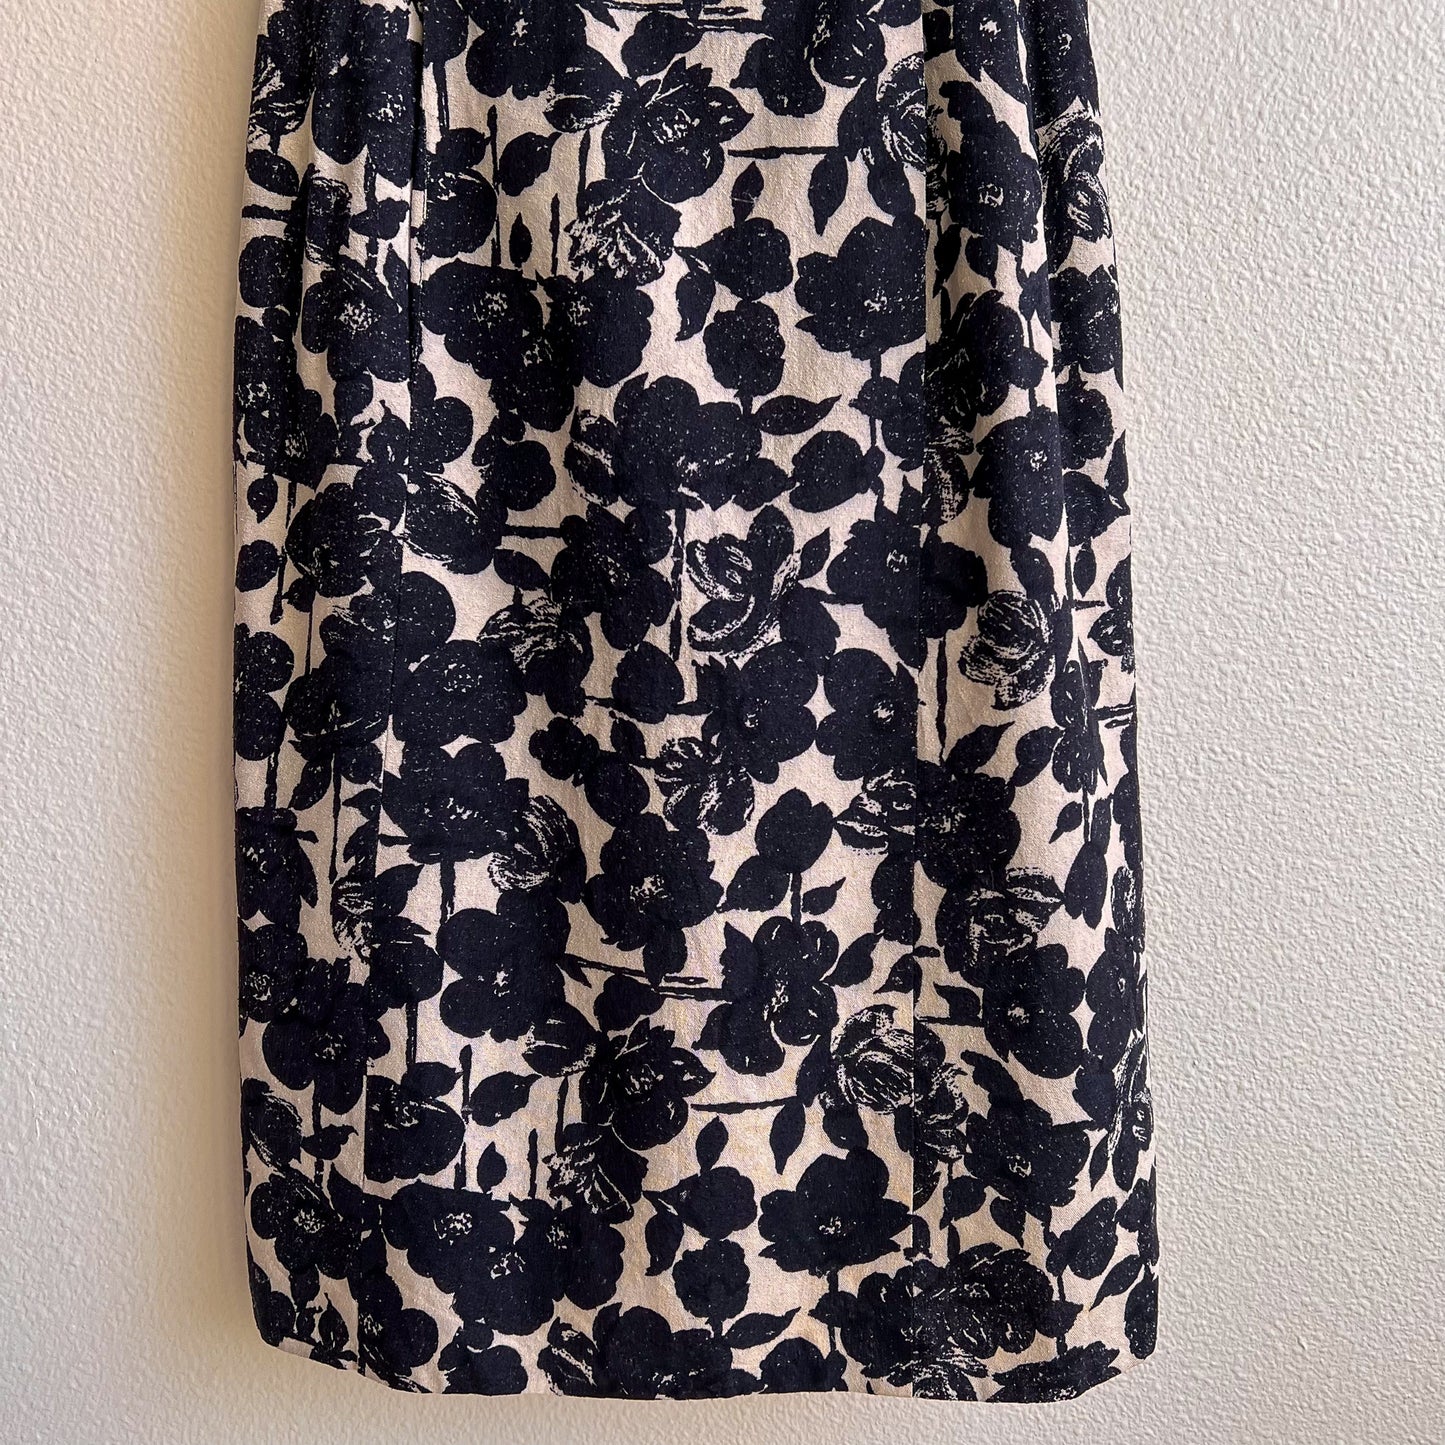 1960s Black and White Floral Button Dress (S/M)